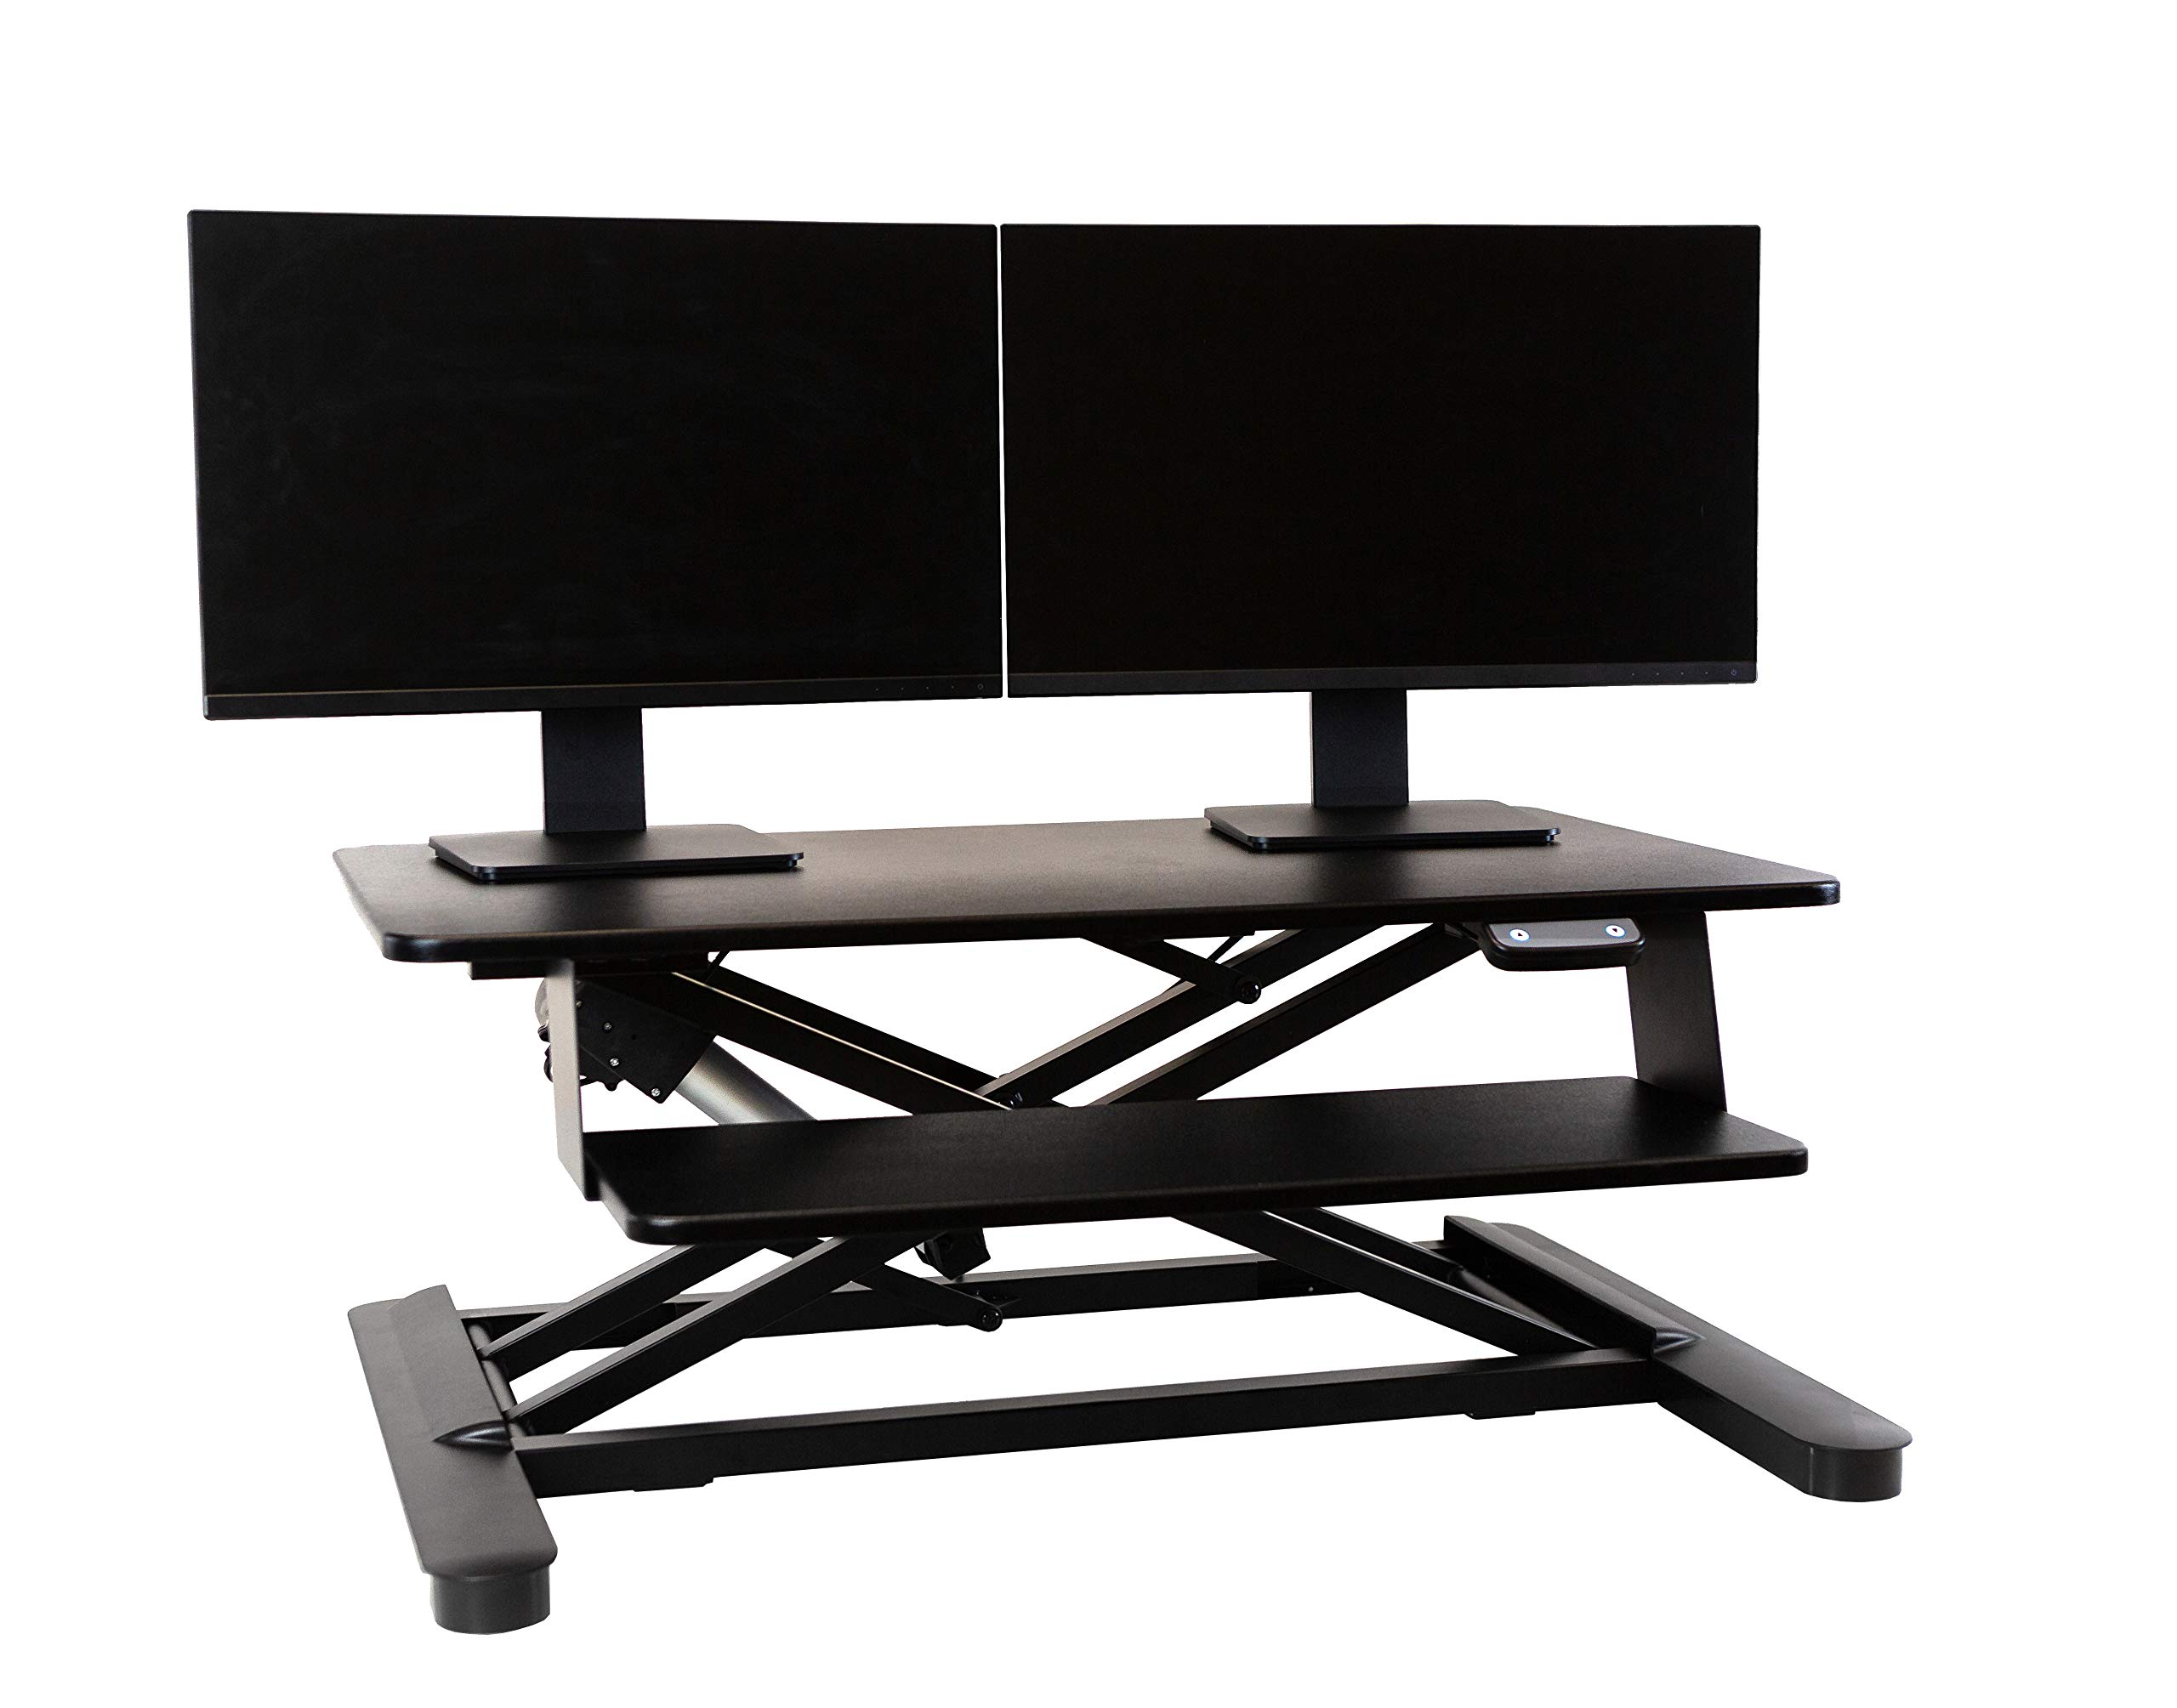 Ergotech Freedom Electronic Desk, Includes Fully Assembled E-Desk, Space for Two 24 inch Computer Screen Monitors, Touch of a Button Height Adjustm...